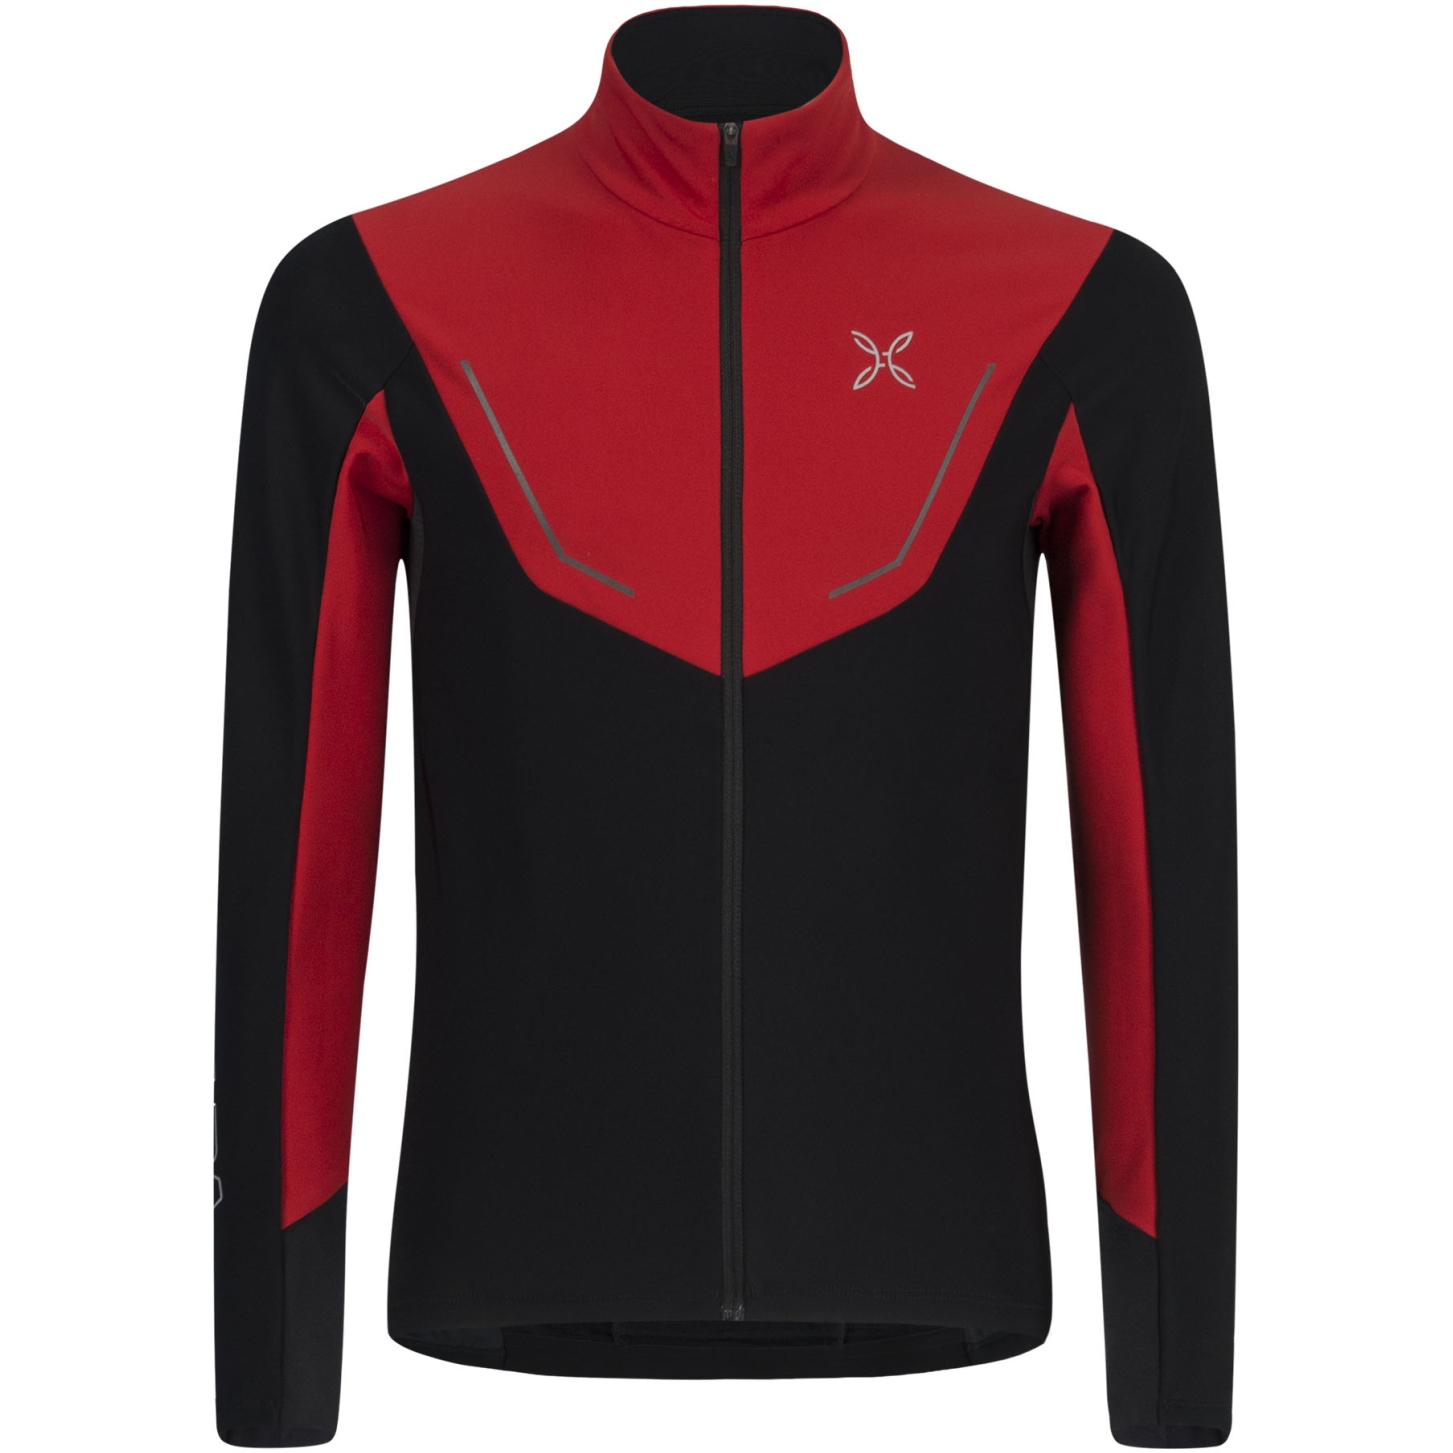 Picture of Montura Ray Longsleeve Jersey - black/red 9010